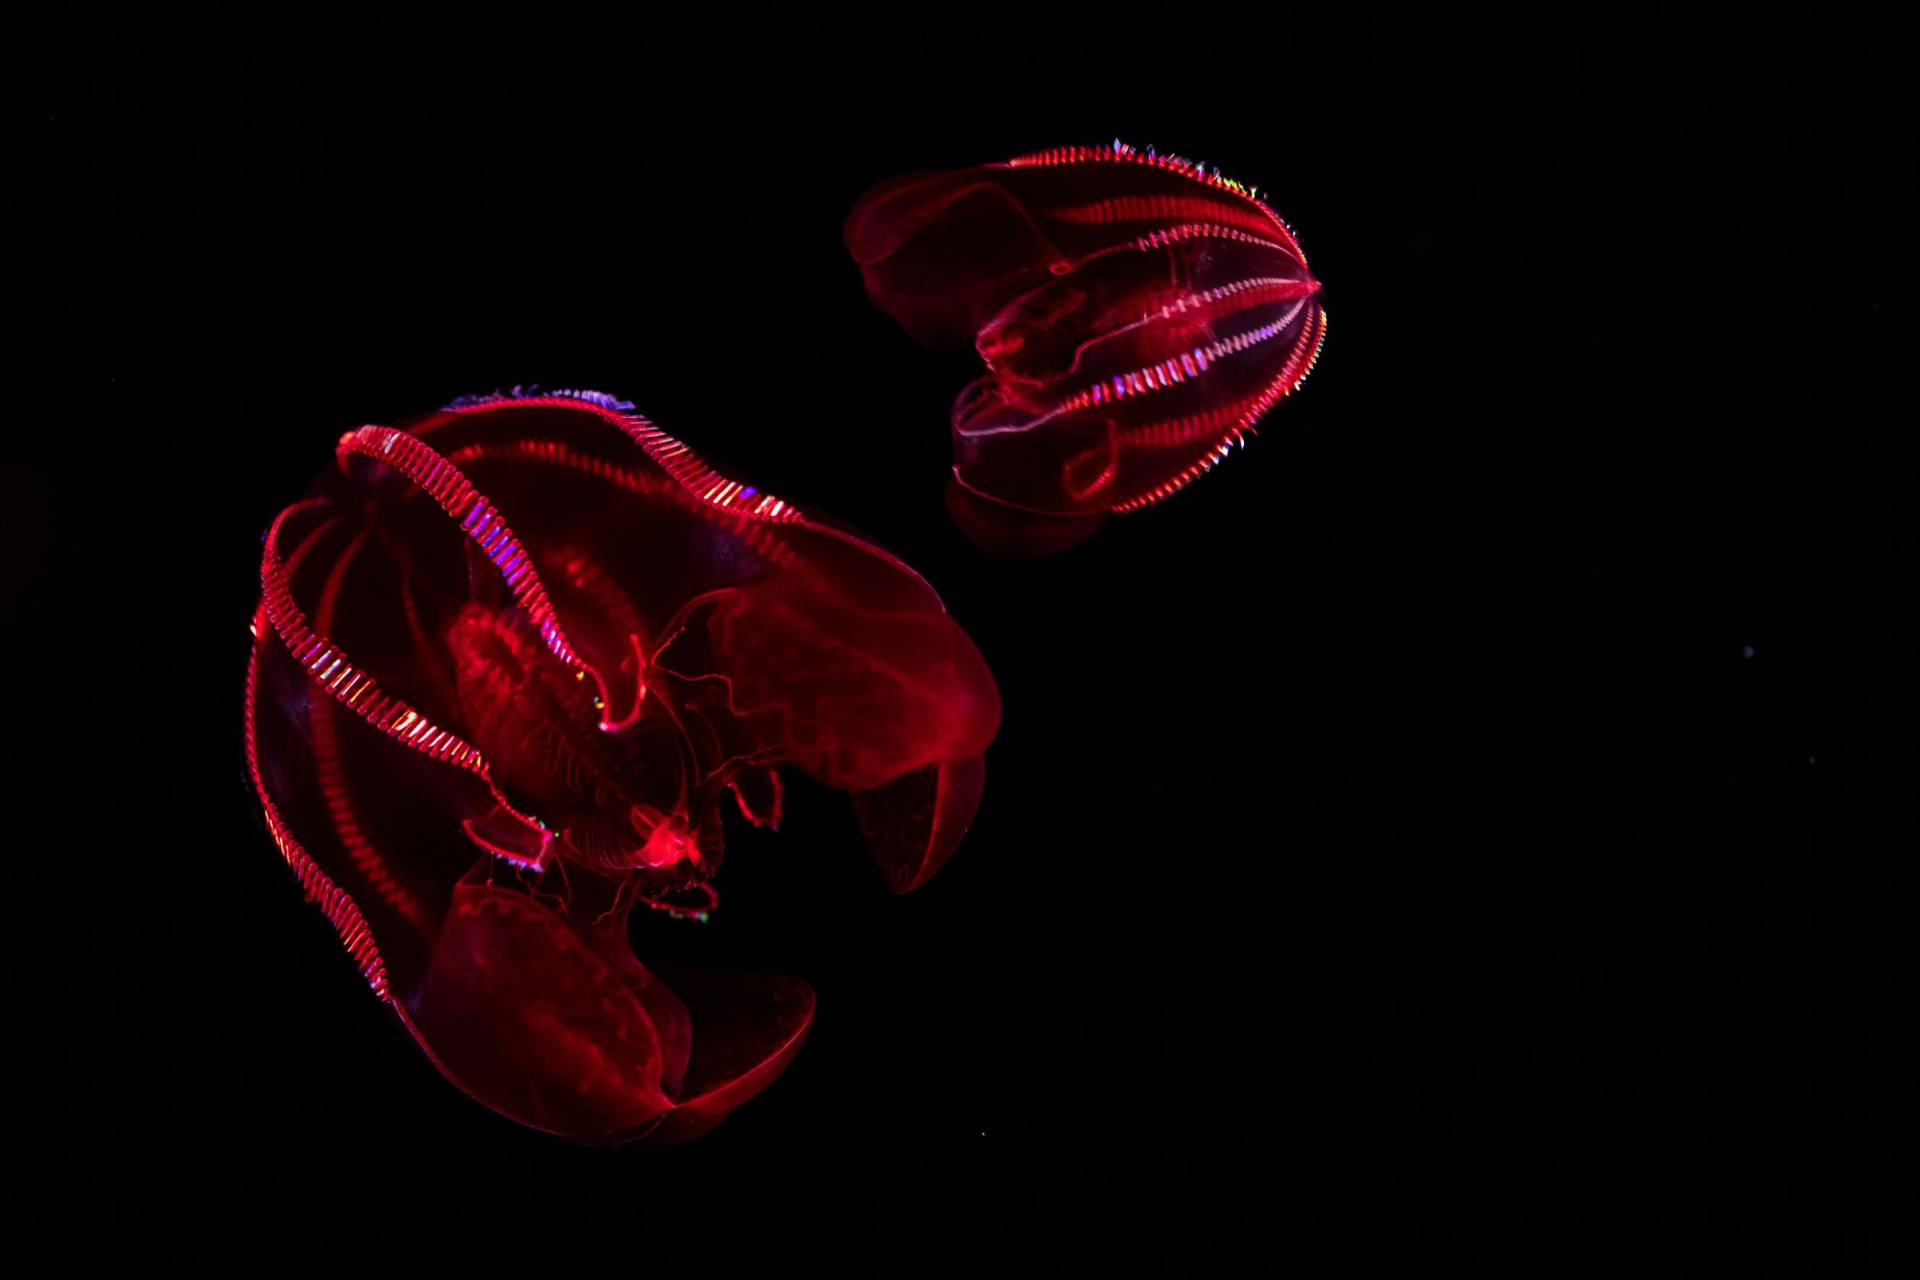 Two jellyfish float against a darkened background. The jellies are shaped like a crimson dome bedazzled with ridges of strobing rainbow lights. In the center of each jelly, red shadowy translucent shapes float. floats